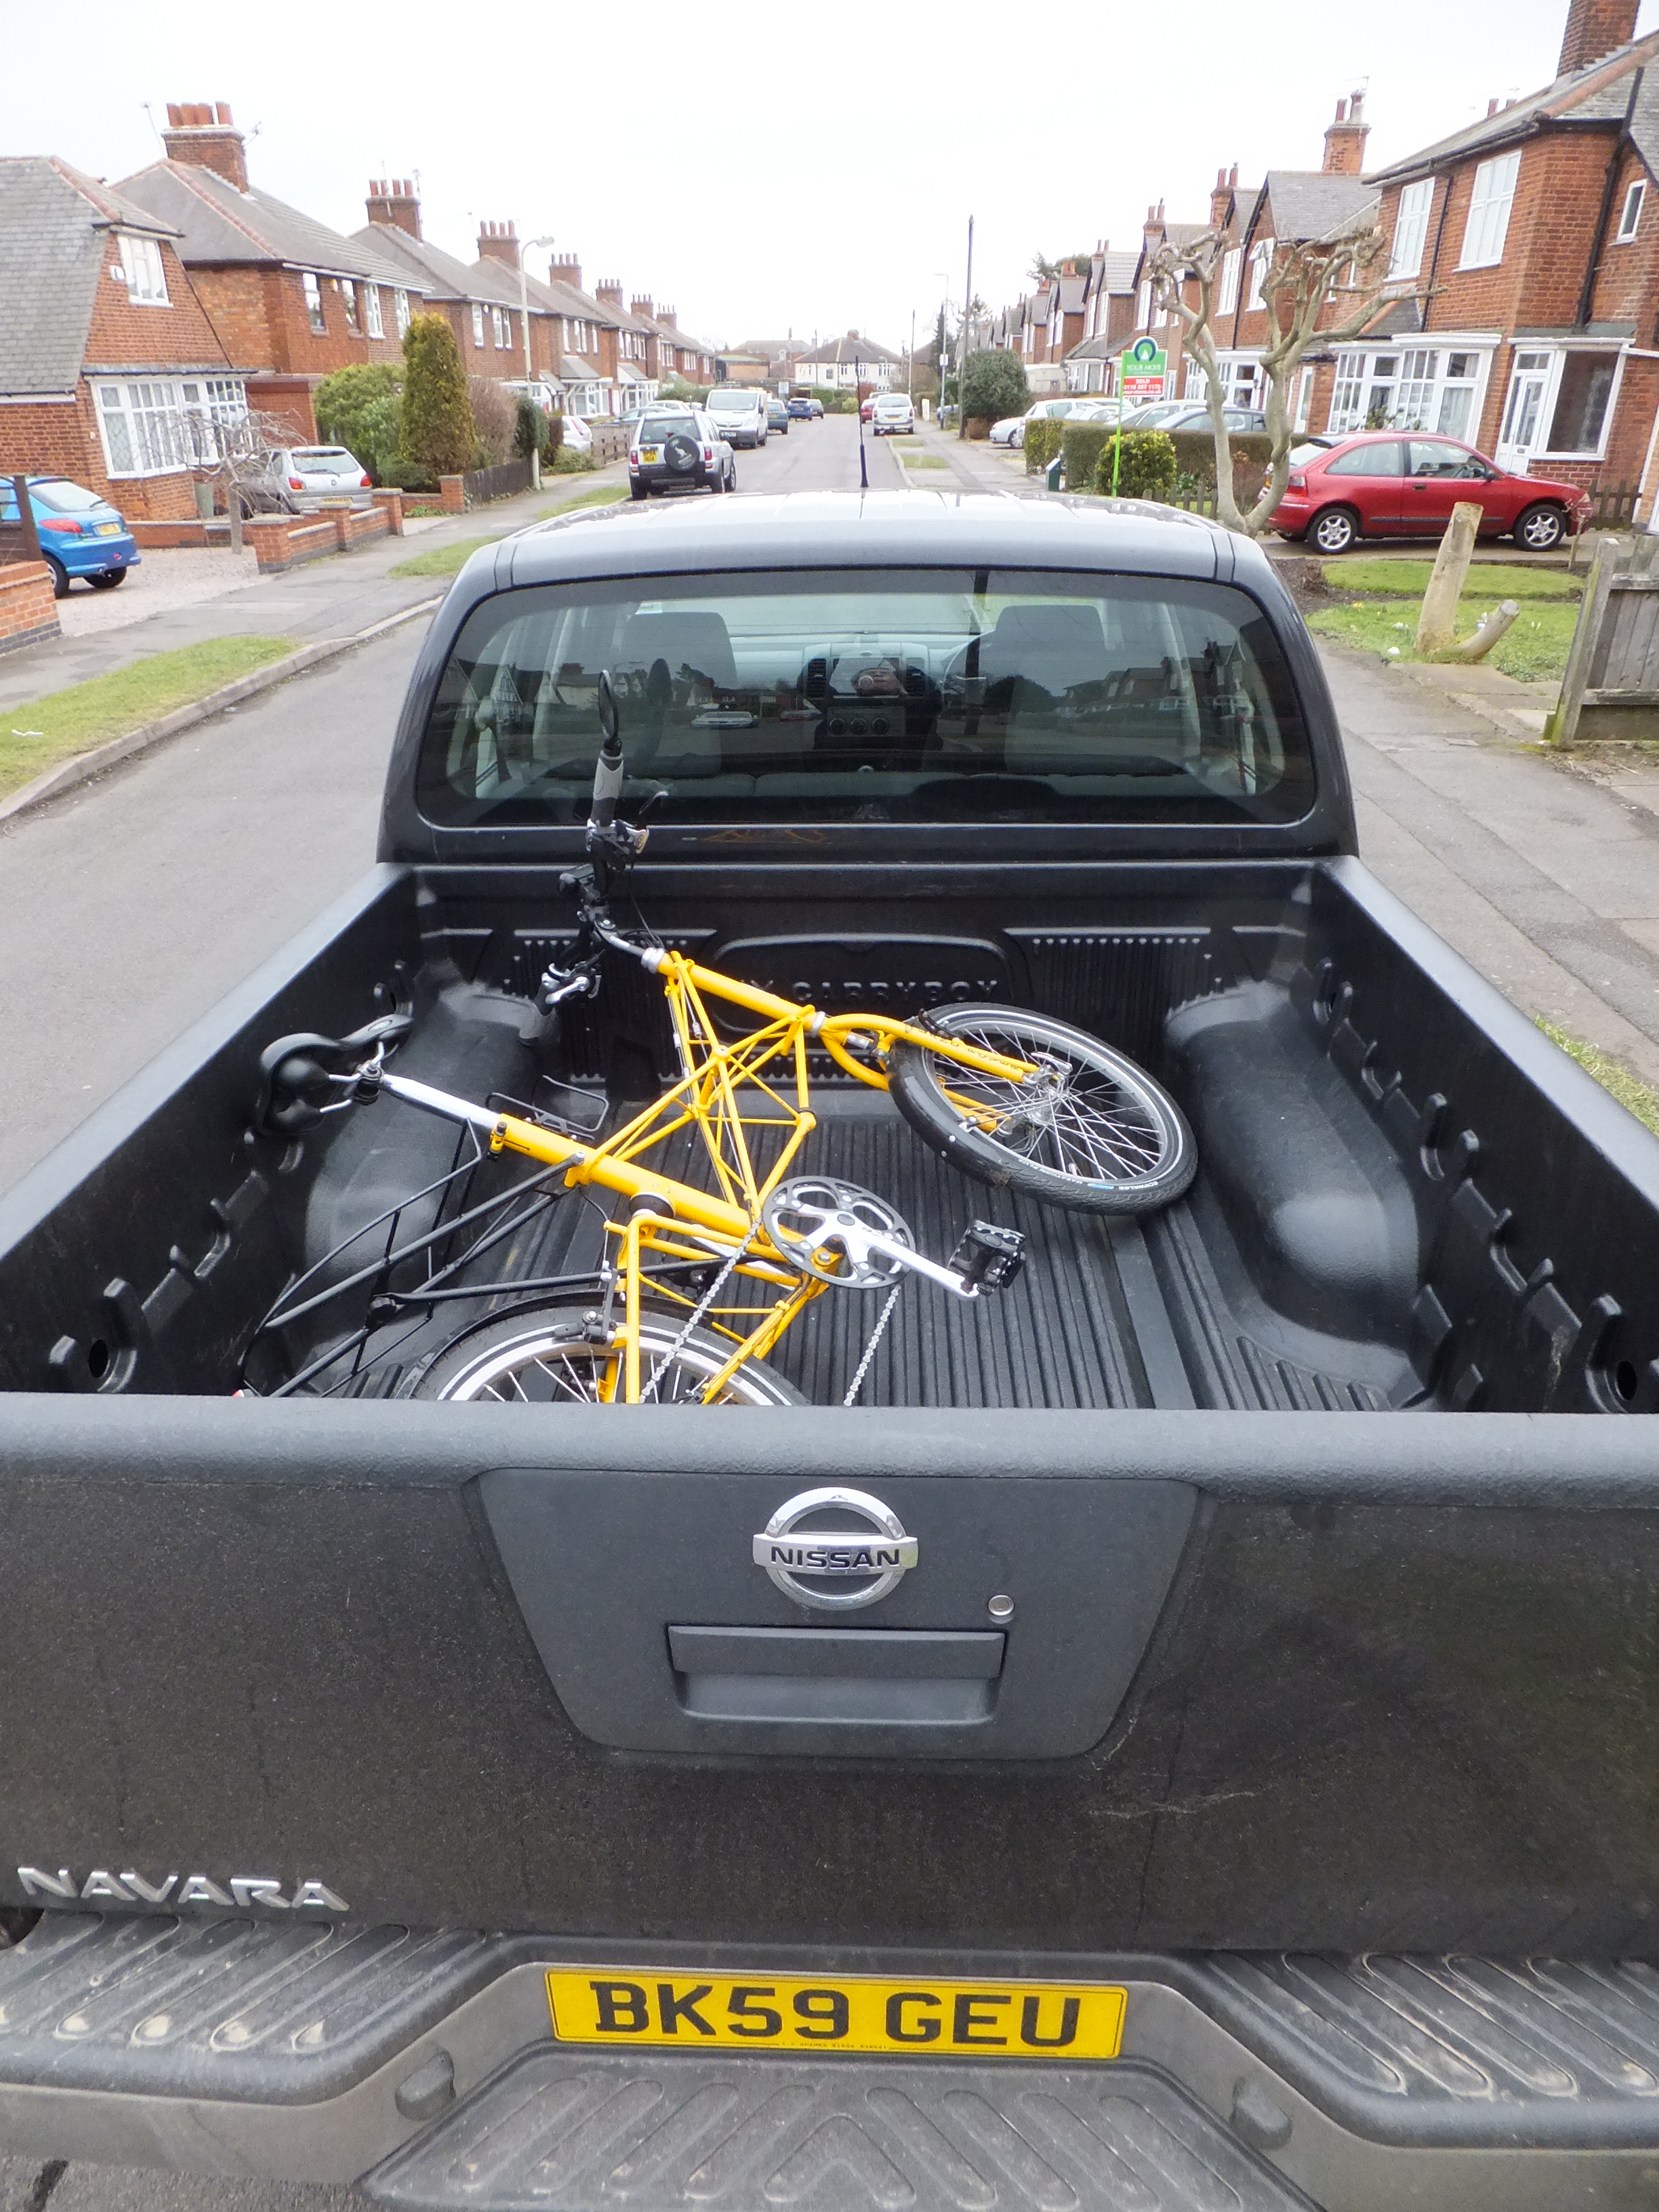 Will a Land Rover fit inside a Nissan Navara? | Flickr - Photo ...